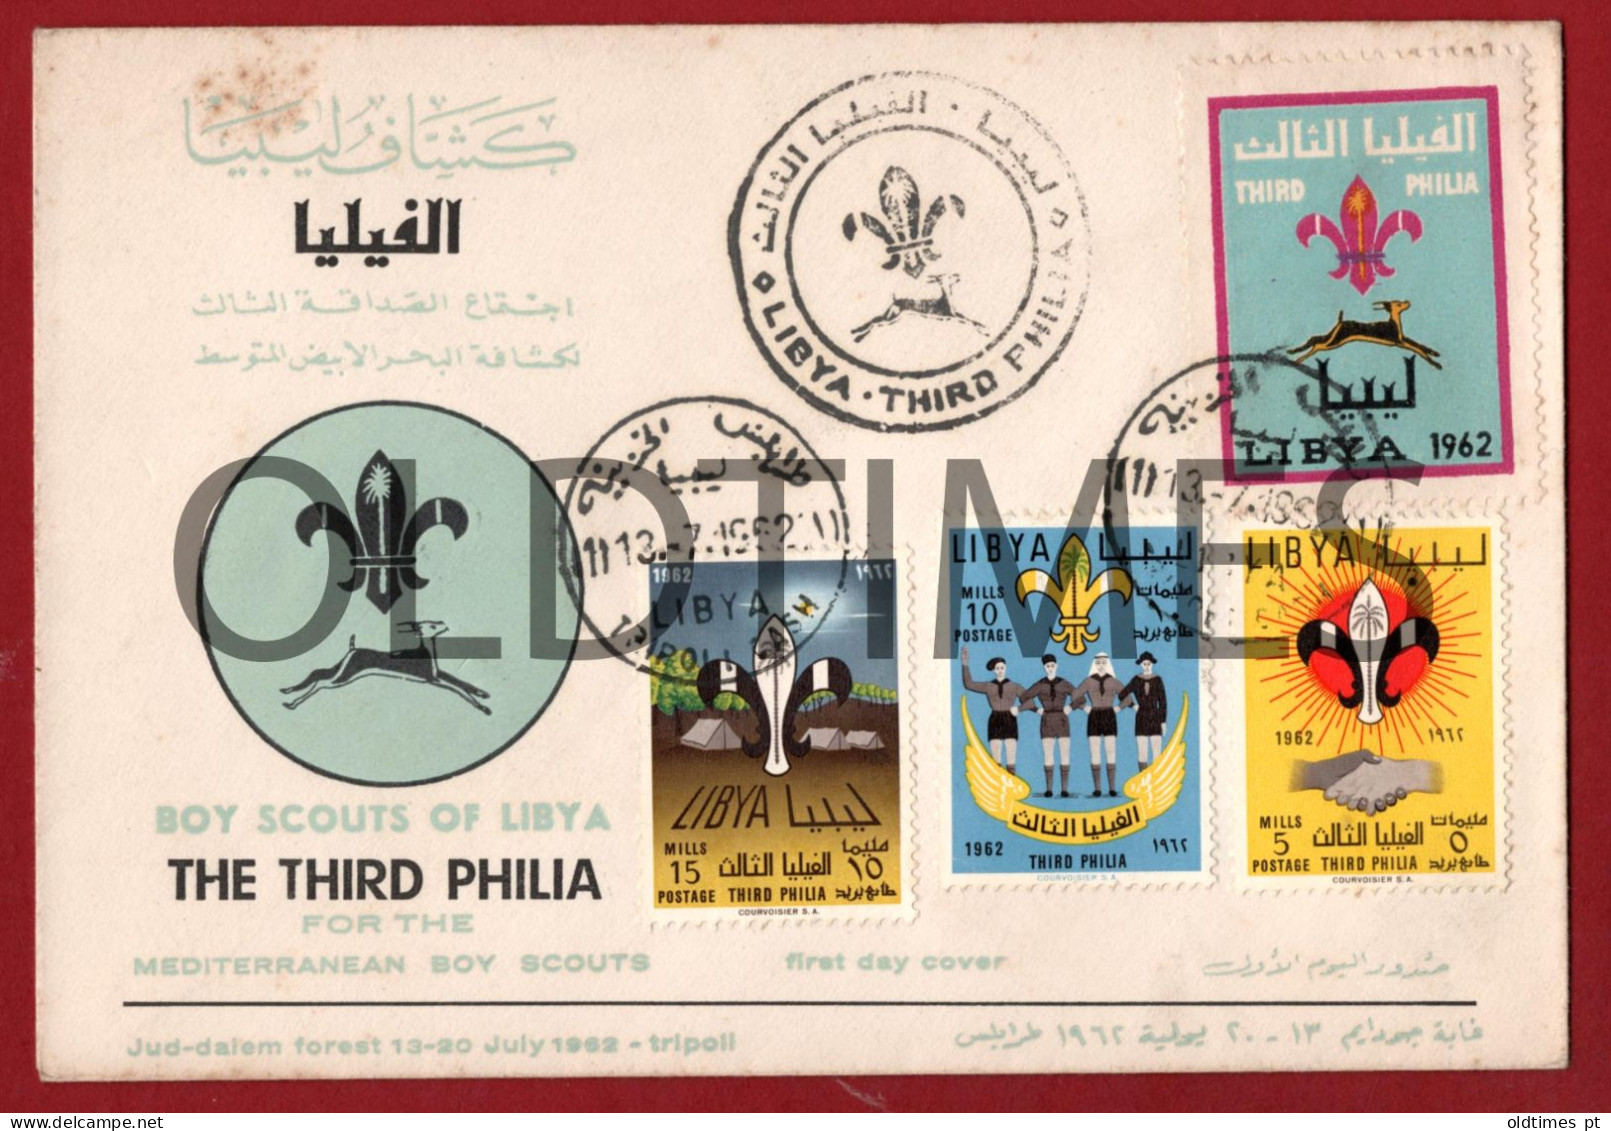 LIBYA - BOY SCOUTS OF LIBYA - THE THIRD PHILIA FOR THE MEDITERRANEAN - FIRST DAY COVER - 1962 ENVELOPE - Movimiento Scout